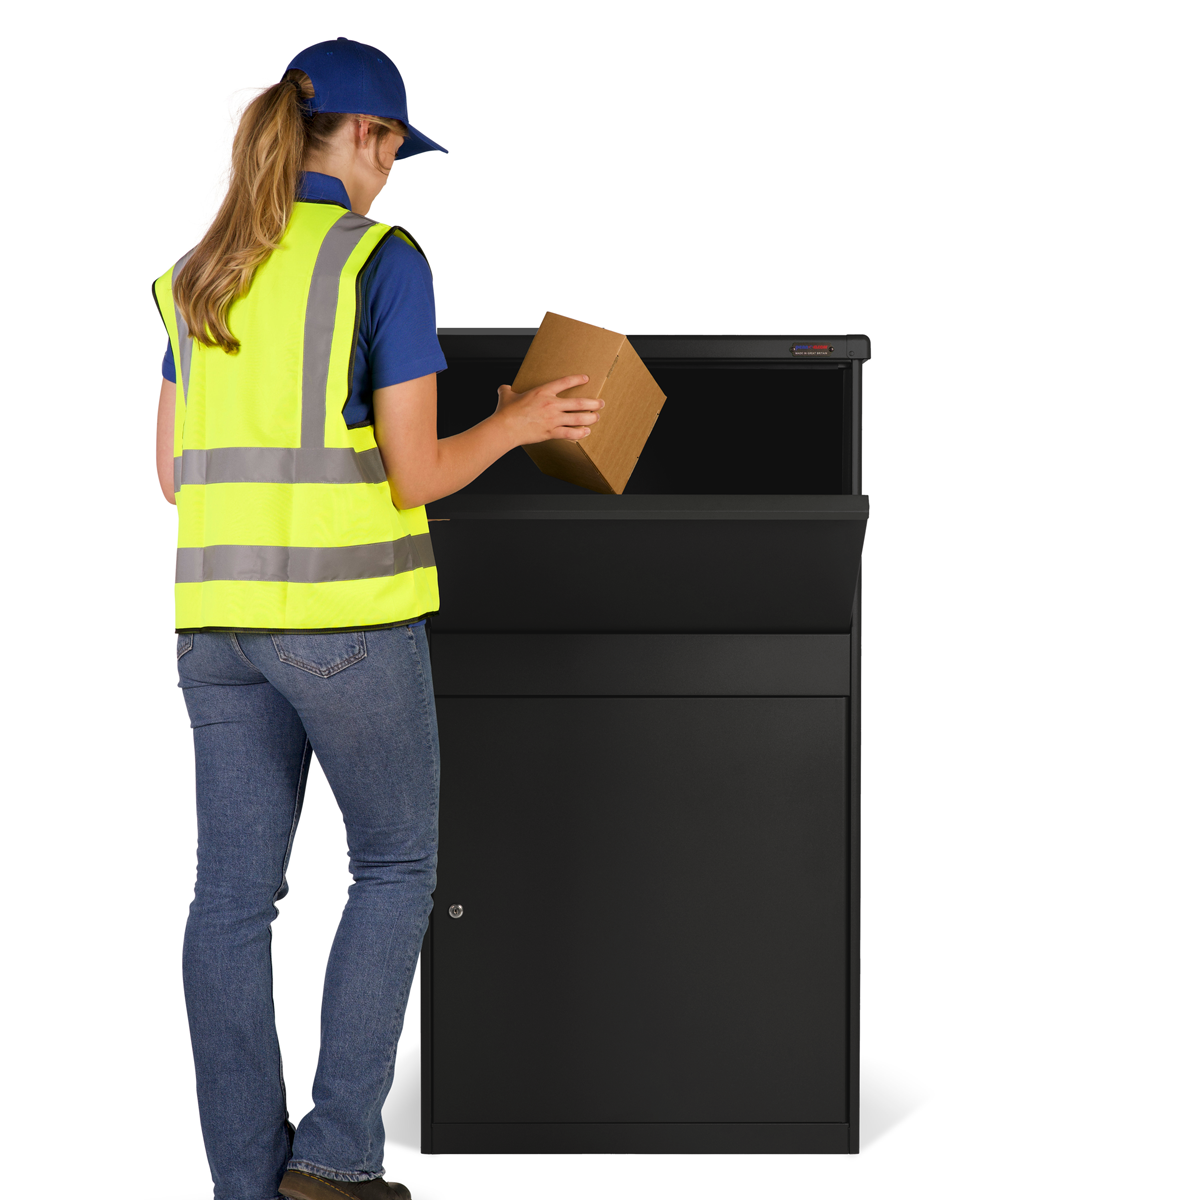 Our choice of front or rear access door gives you the flexibility to place your Parcel Box where you need it most.